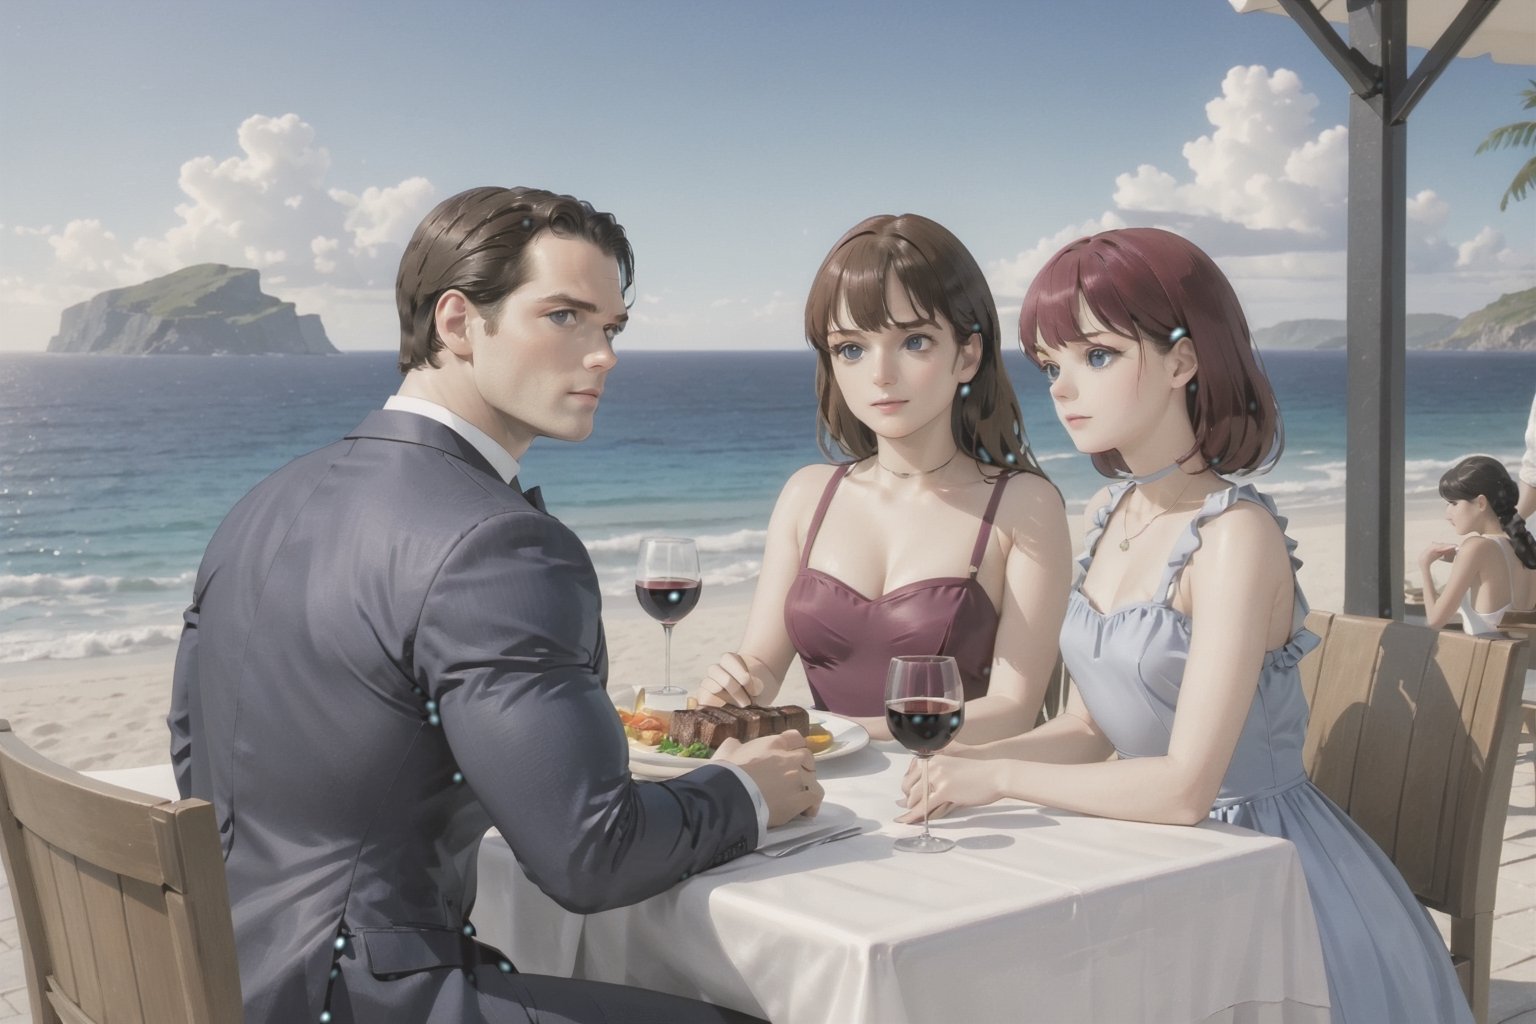 Henry Cavill wearing business suit with 2girls(Frieren and aura) both wearing nice dress, sitting, steak and wine on the table, fantasy, (Shot from distance),background(ocean, outdoor restaurant)(masterpiece, highres, high quality:1.2), ambient occlusion, low saturation, High detailed, Detailedface, Dreamscape,Extremely Realistic